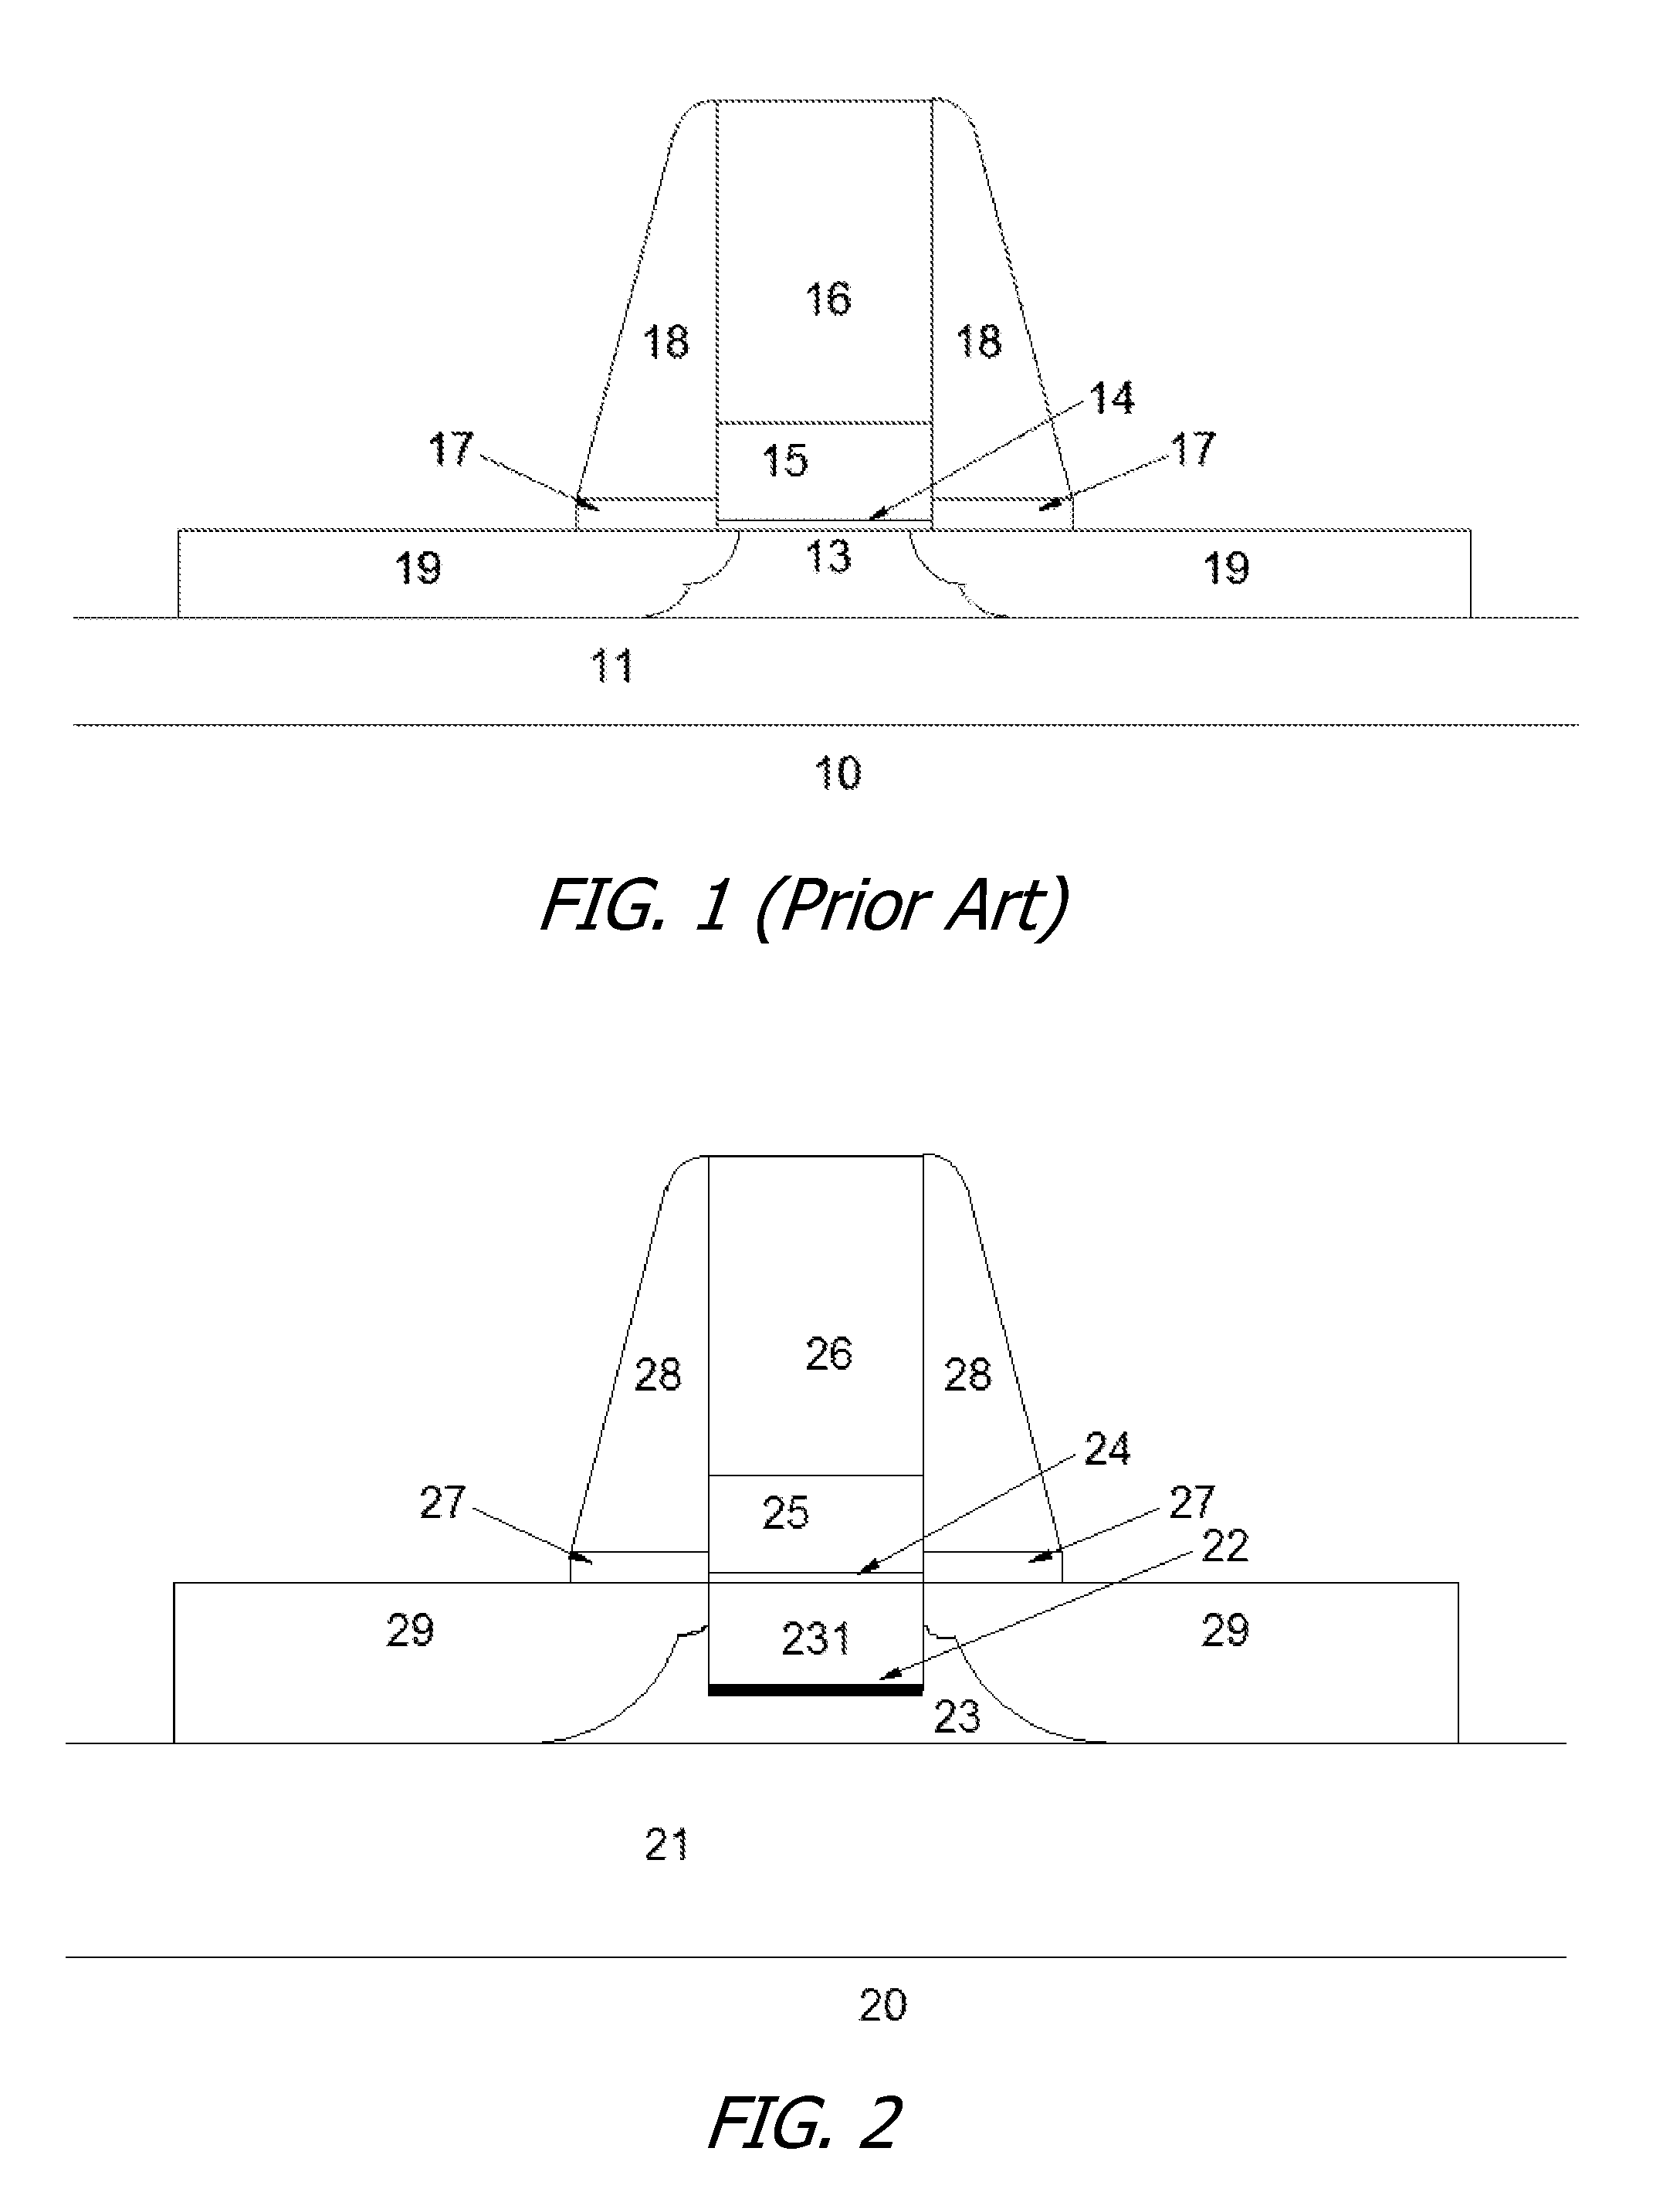 Fluctuation Resistant Low Access Resistance Fully Depleted SOI Transistor with Improved Channel Thickness Control and Reduced Access Resistance